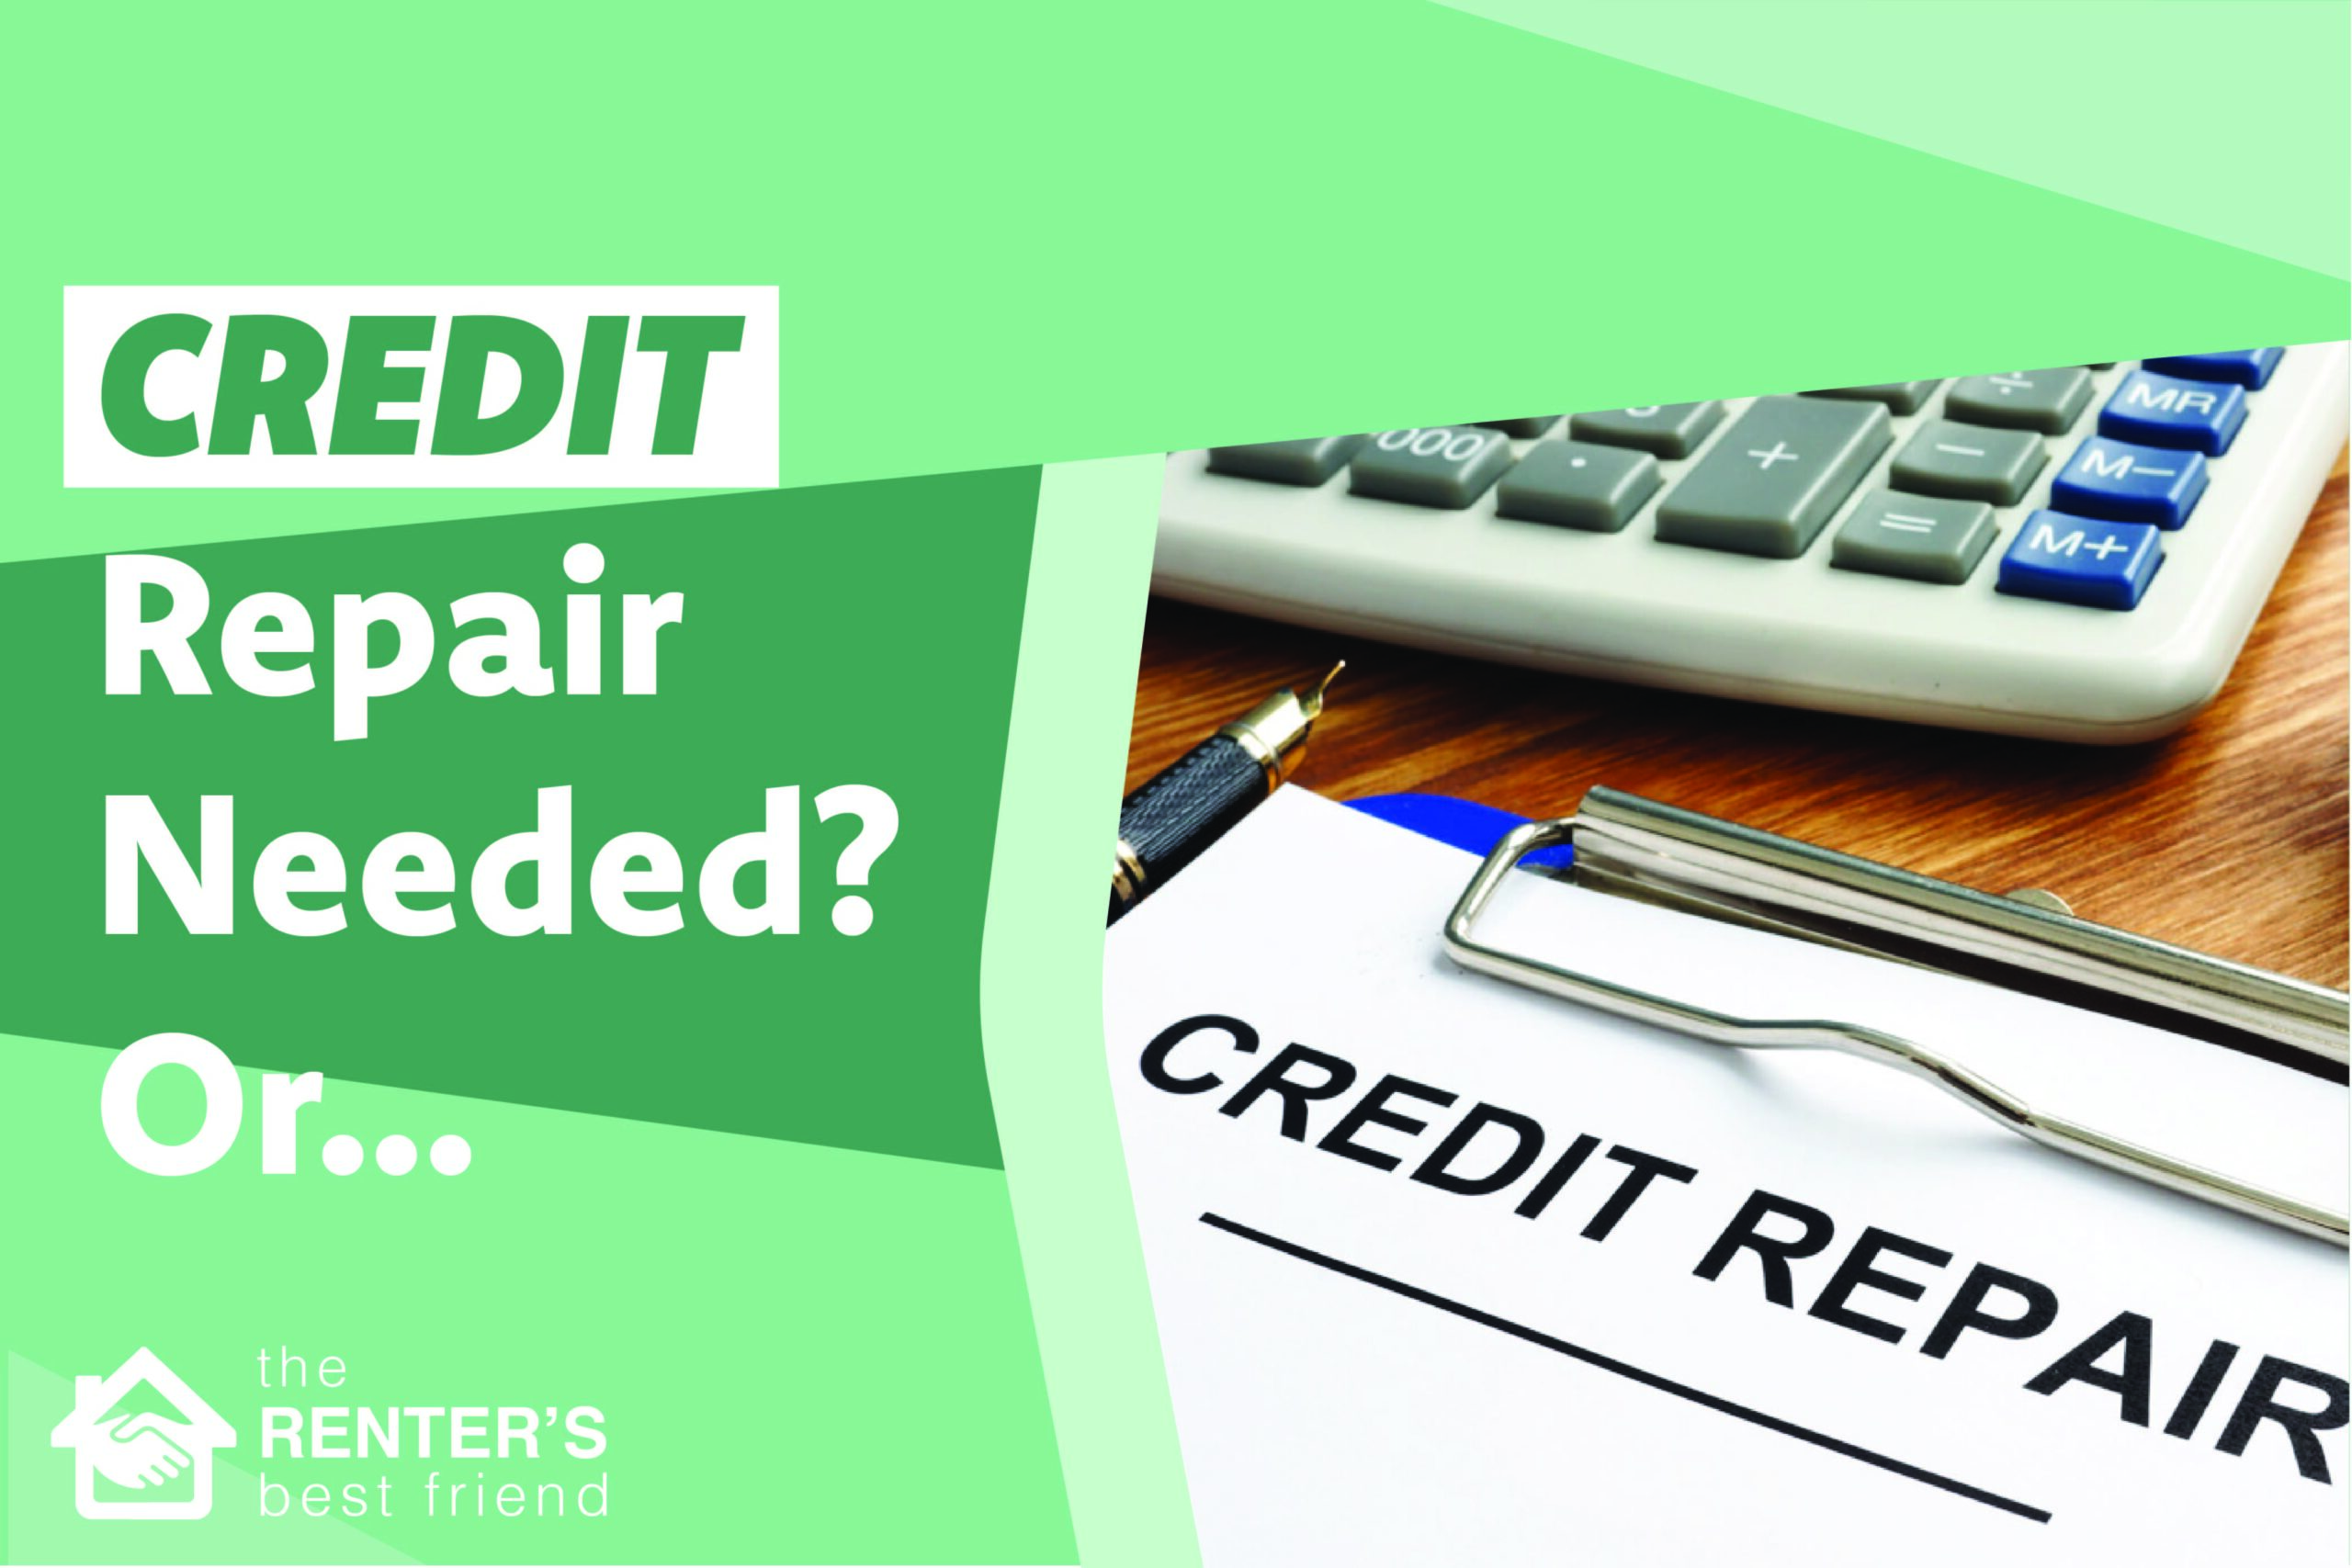 When Do You Need Credit Repair